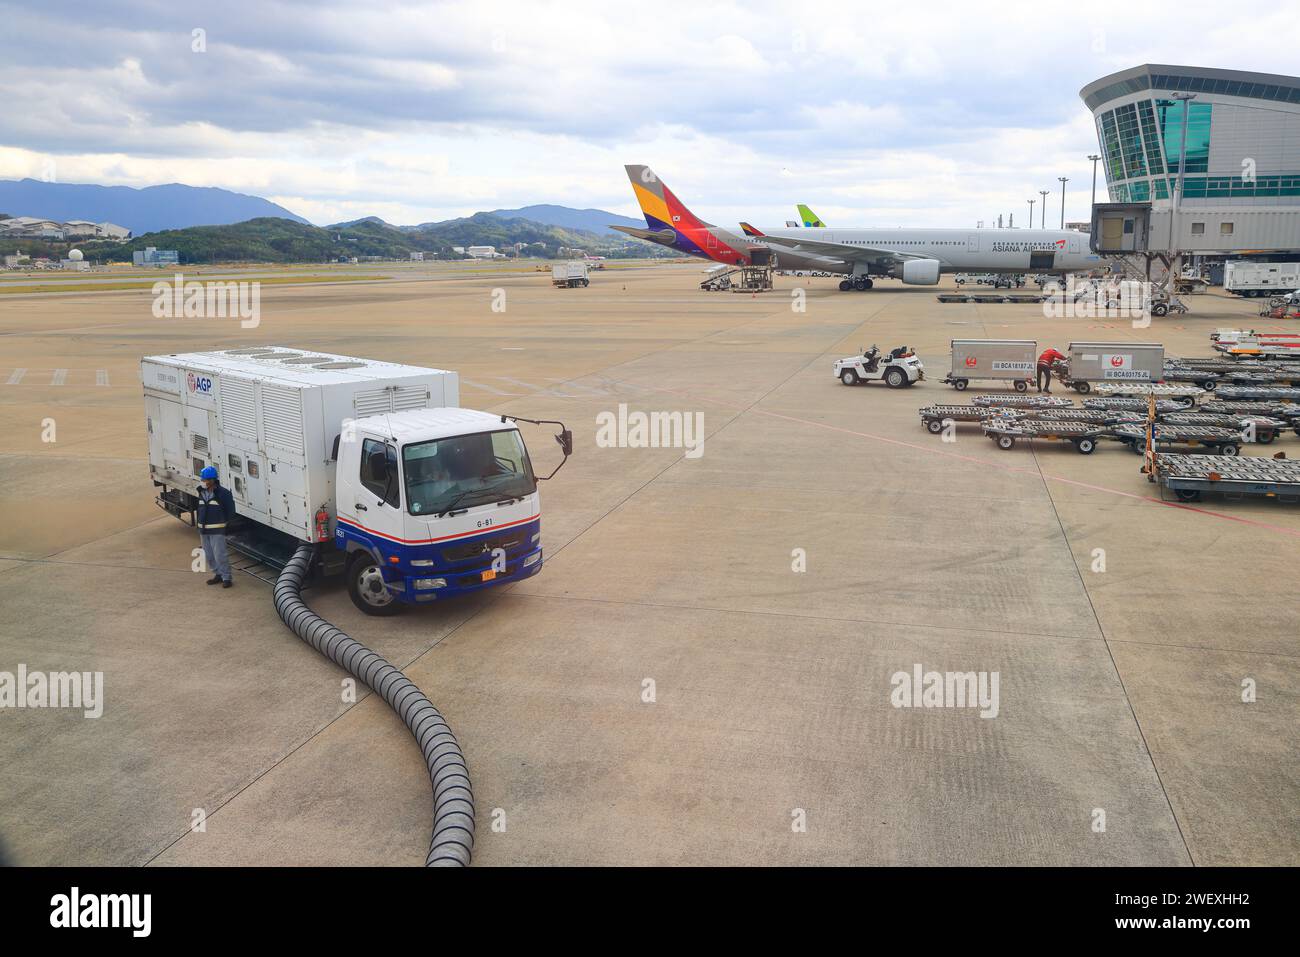 A ground supply power unit is attached to a modern airliner parked in an airport parking lot. Prior to flying, the aircraft undergoes maintenance and Stock Photo